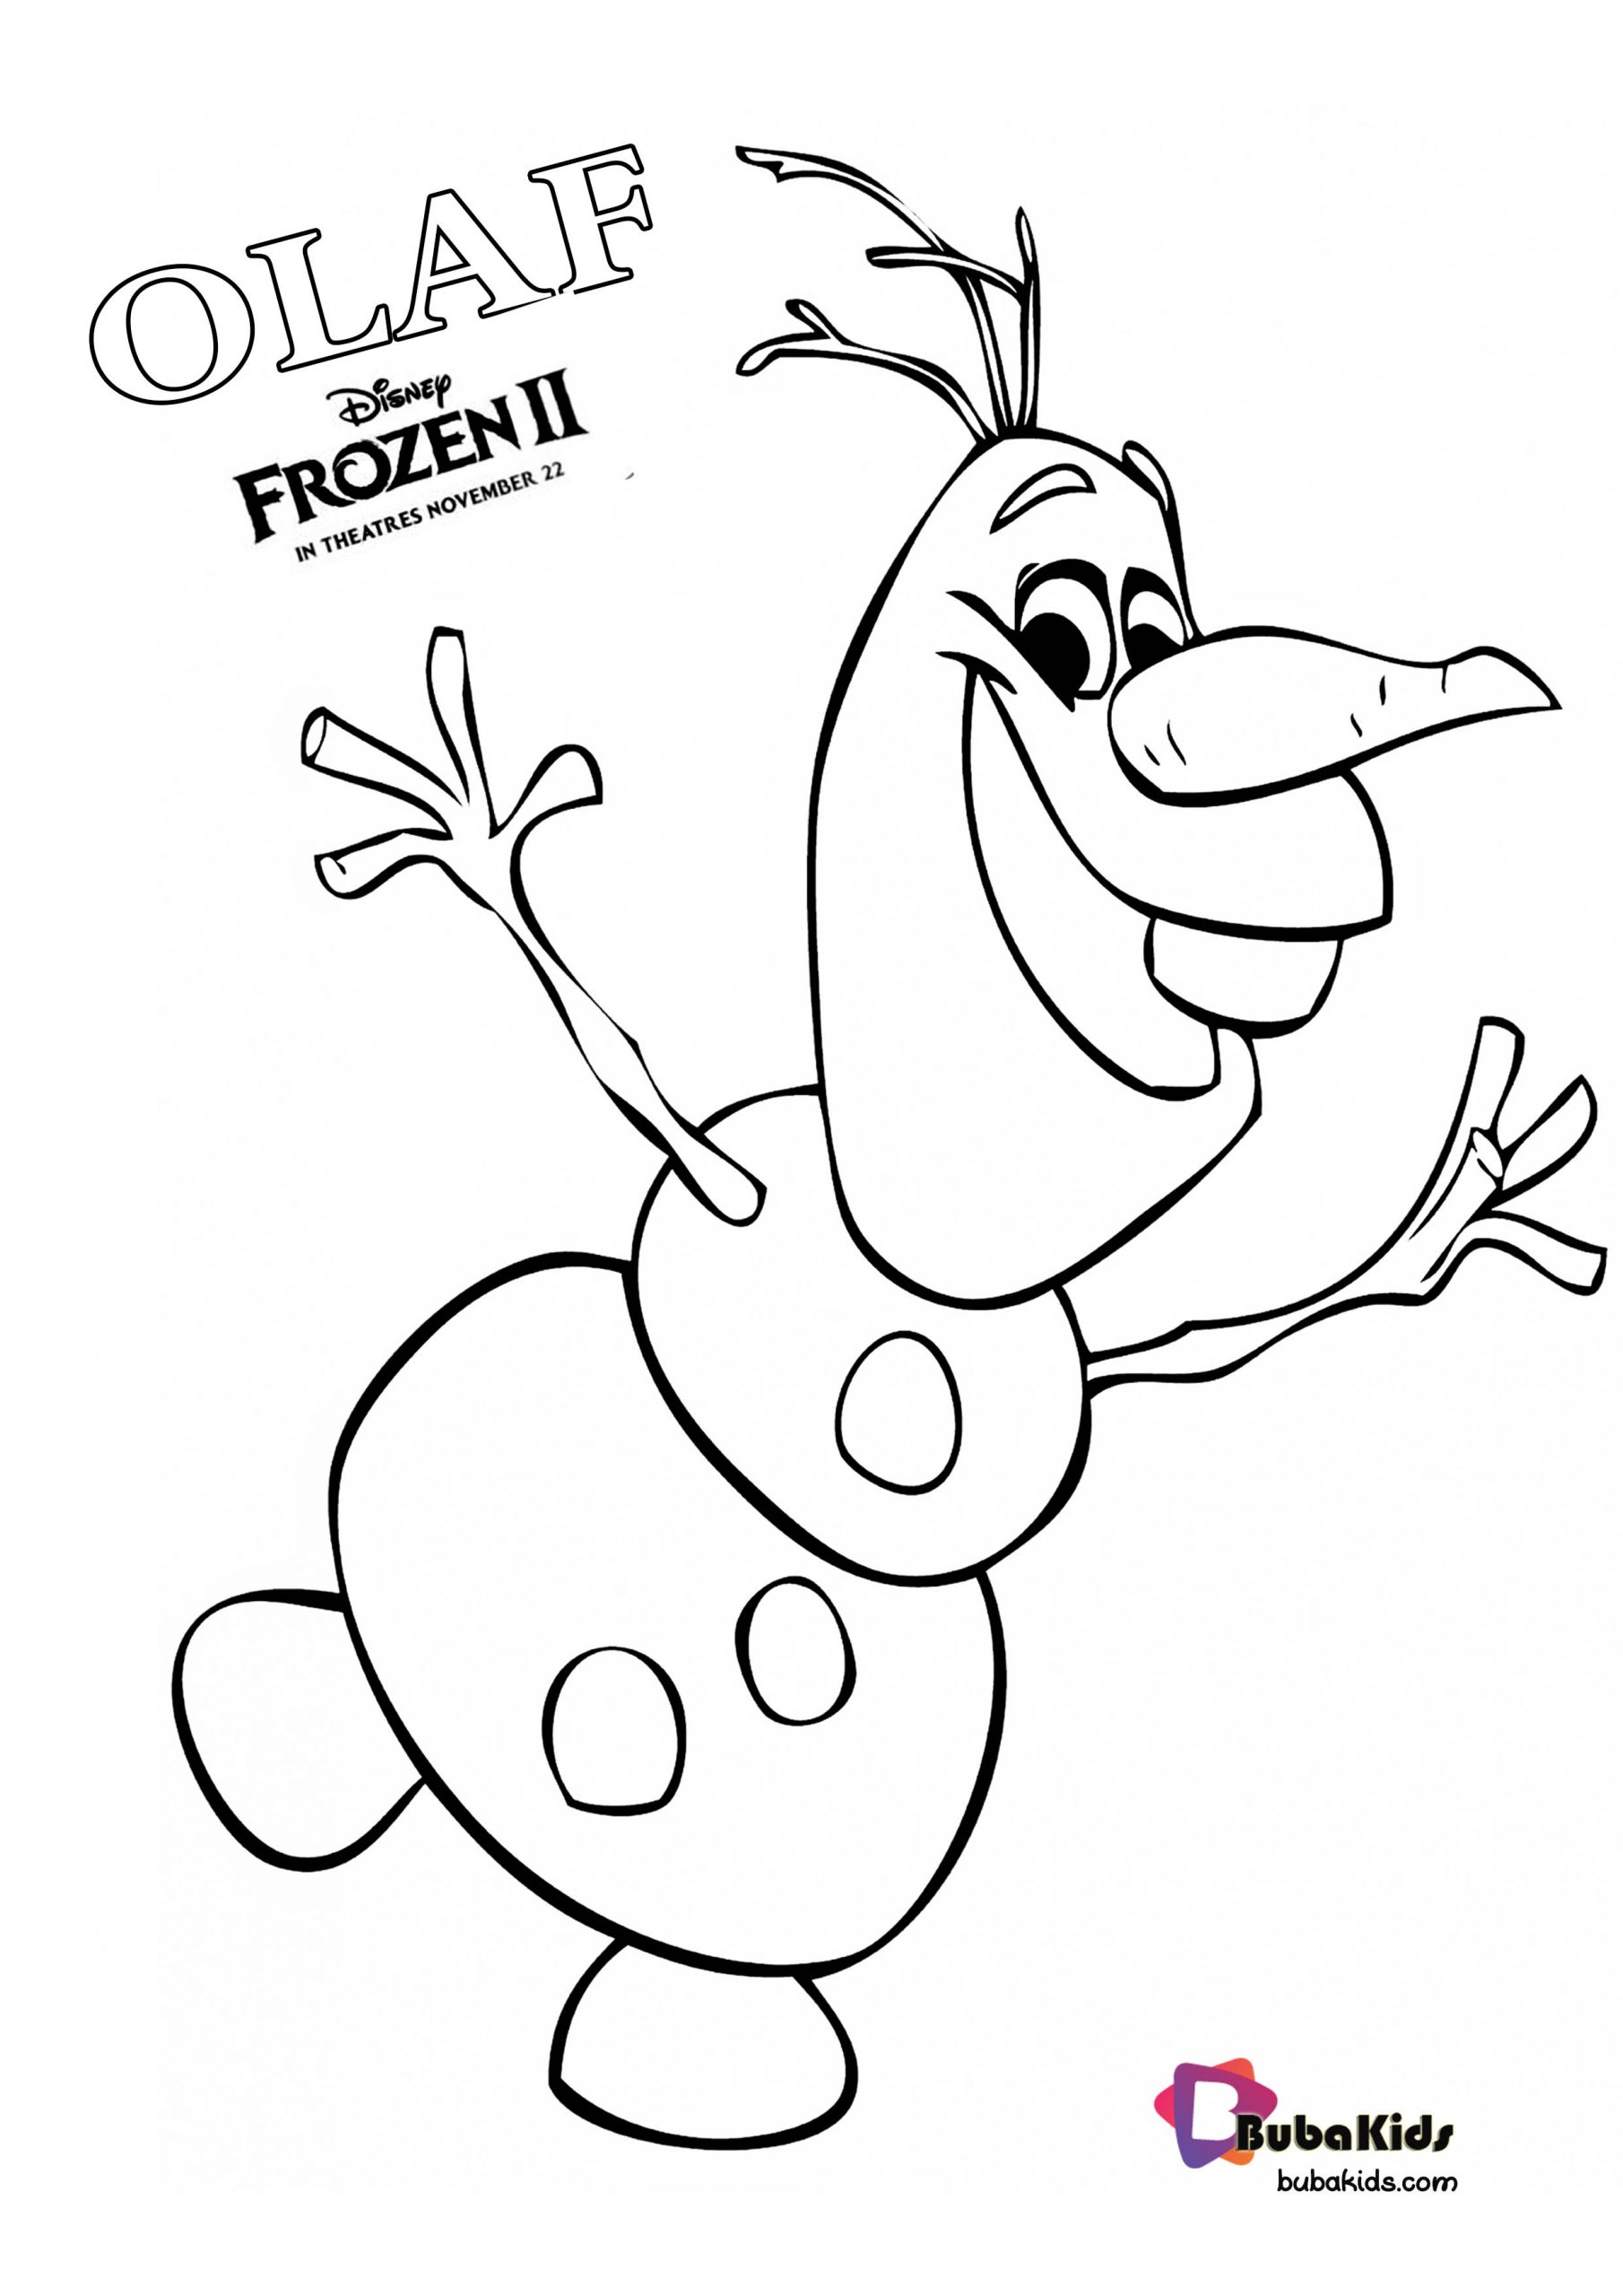 Olaf Frozen 2 Coloring Page